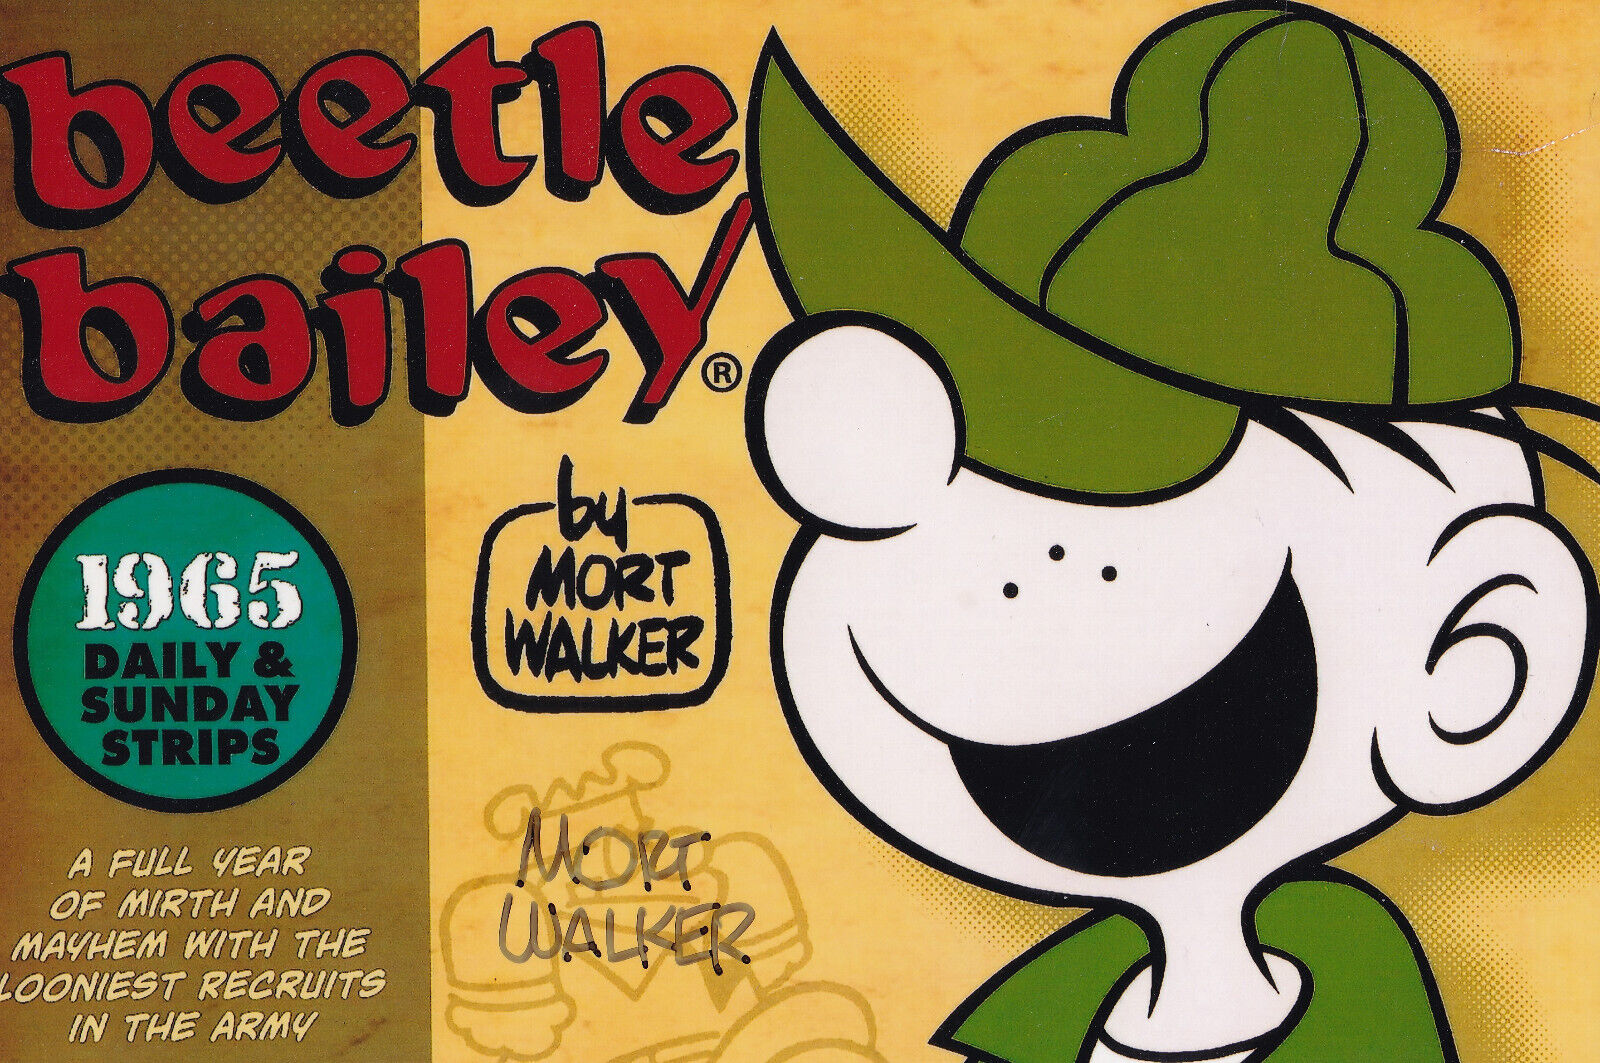 Mort Walker Signed Autographed 4x6 Photo WWII Beetle Bailey Intelligence Officer